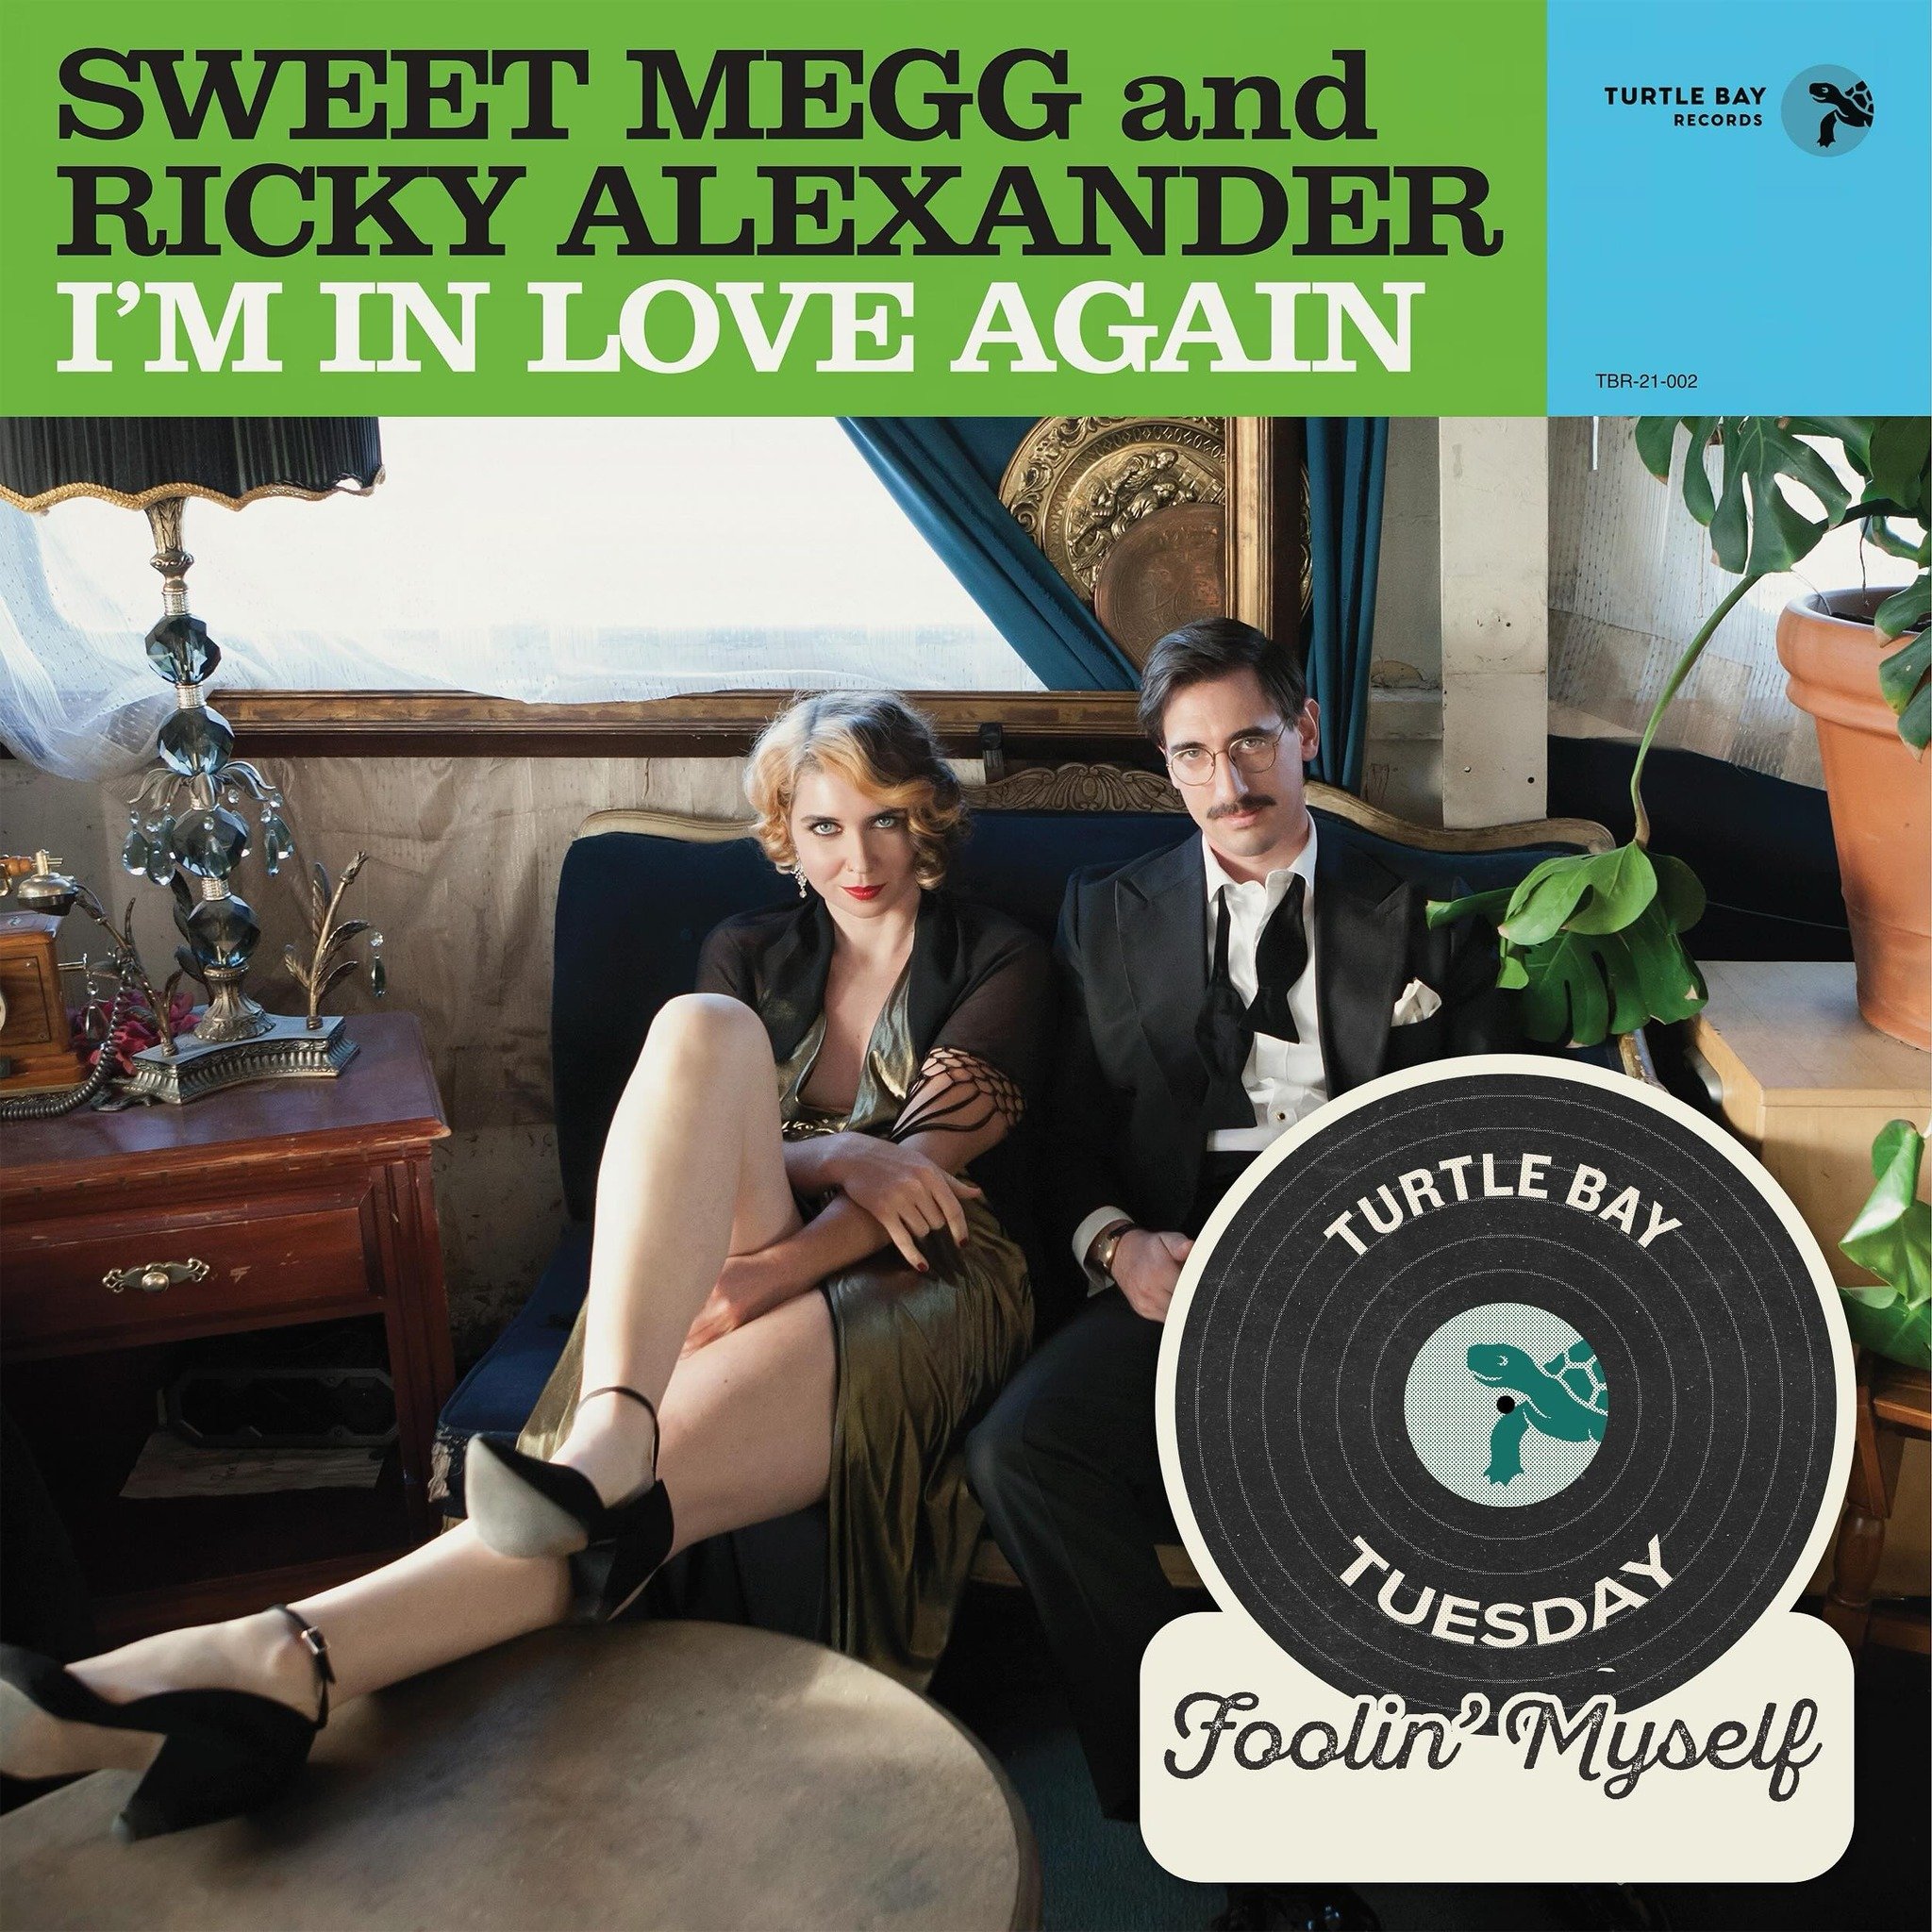 This weeks #turtlebaytuesday is &lsquo;Foolin&rsquo; Myself&rsquo; by Sweet Megg and Ricky Alexander. You can listen on your favorite streaming service, or better still, go to turtlebayrecords.com to buy the album and shop the whole catalogue. 
.
.
.